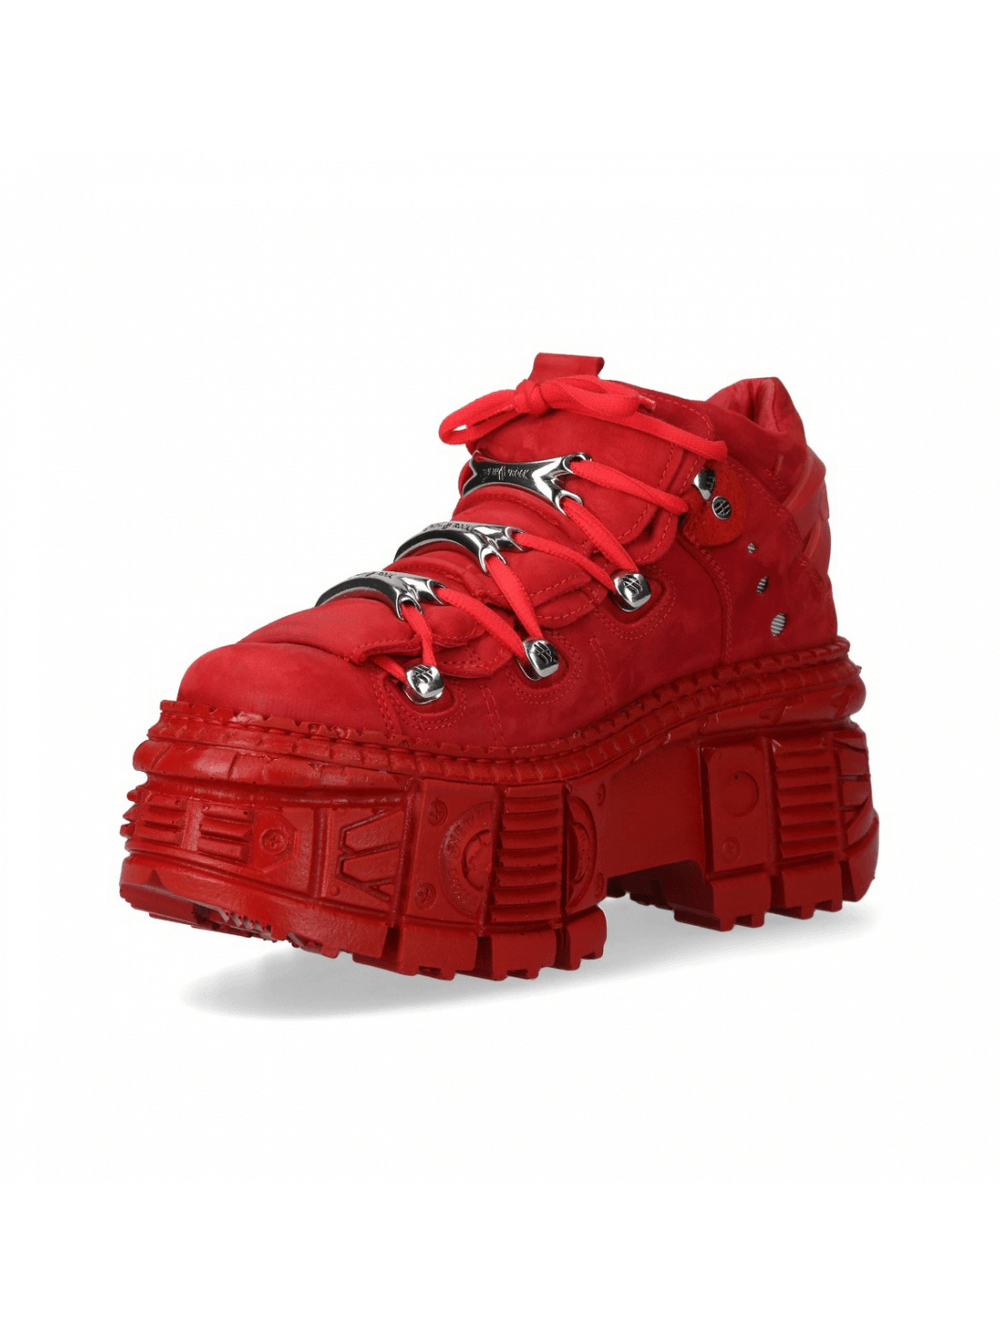 NEW ROCK Fashion Red Platform Ankle Boots In Rock Style